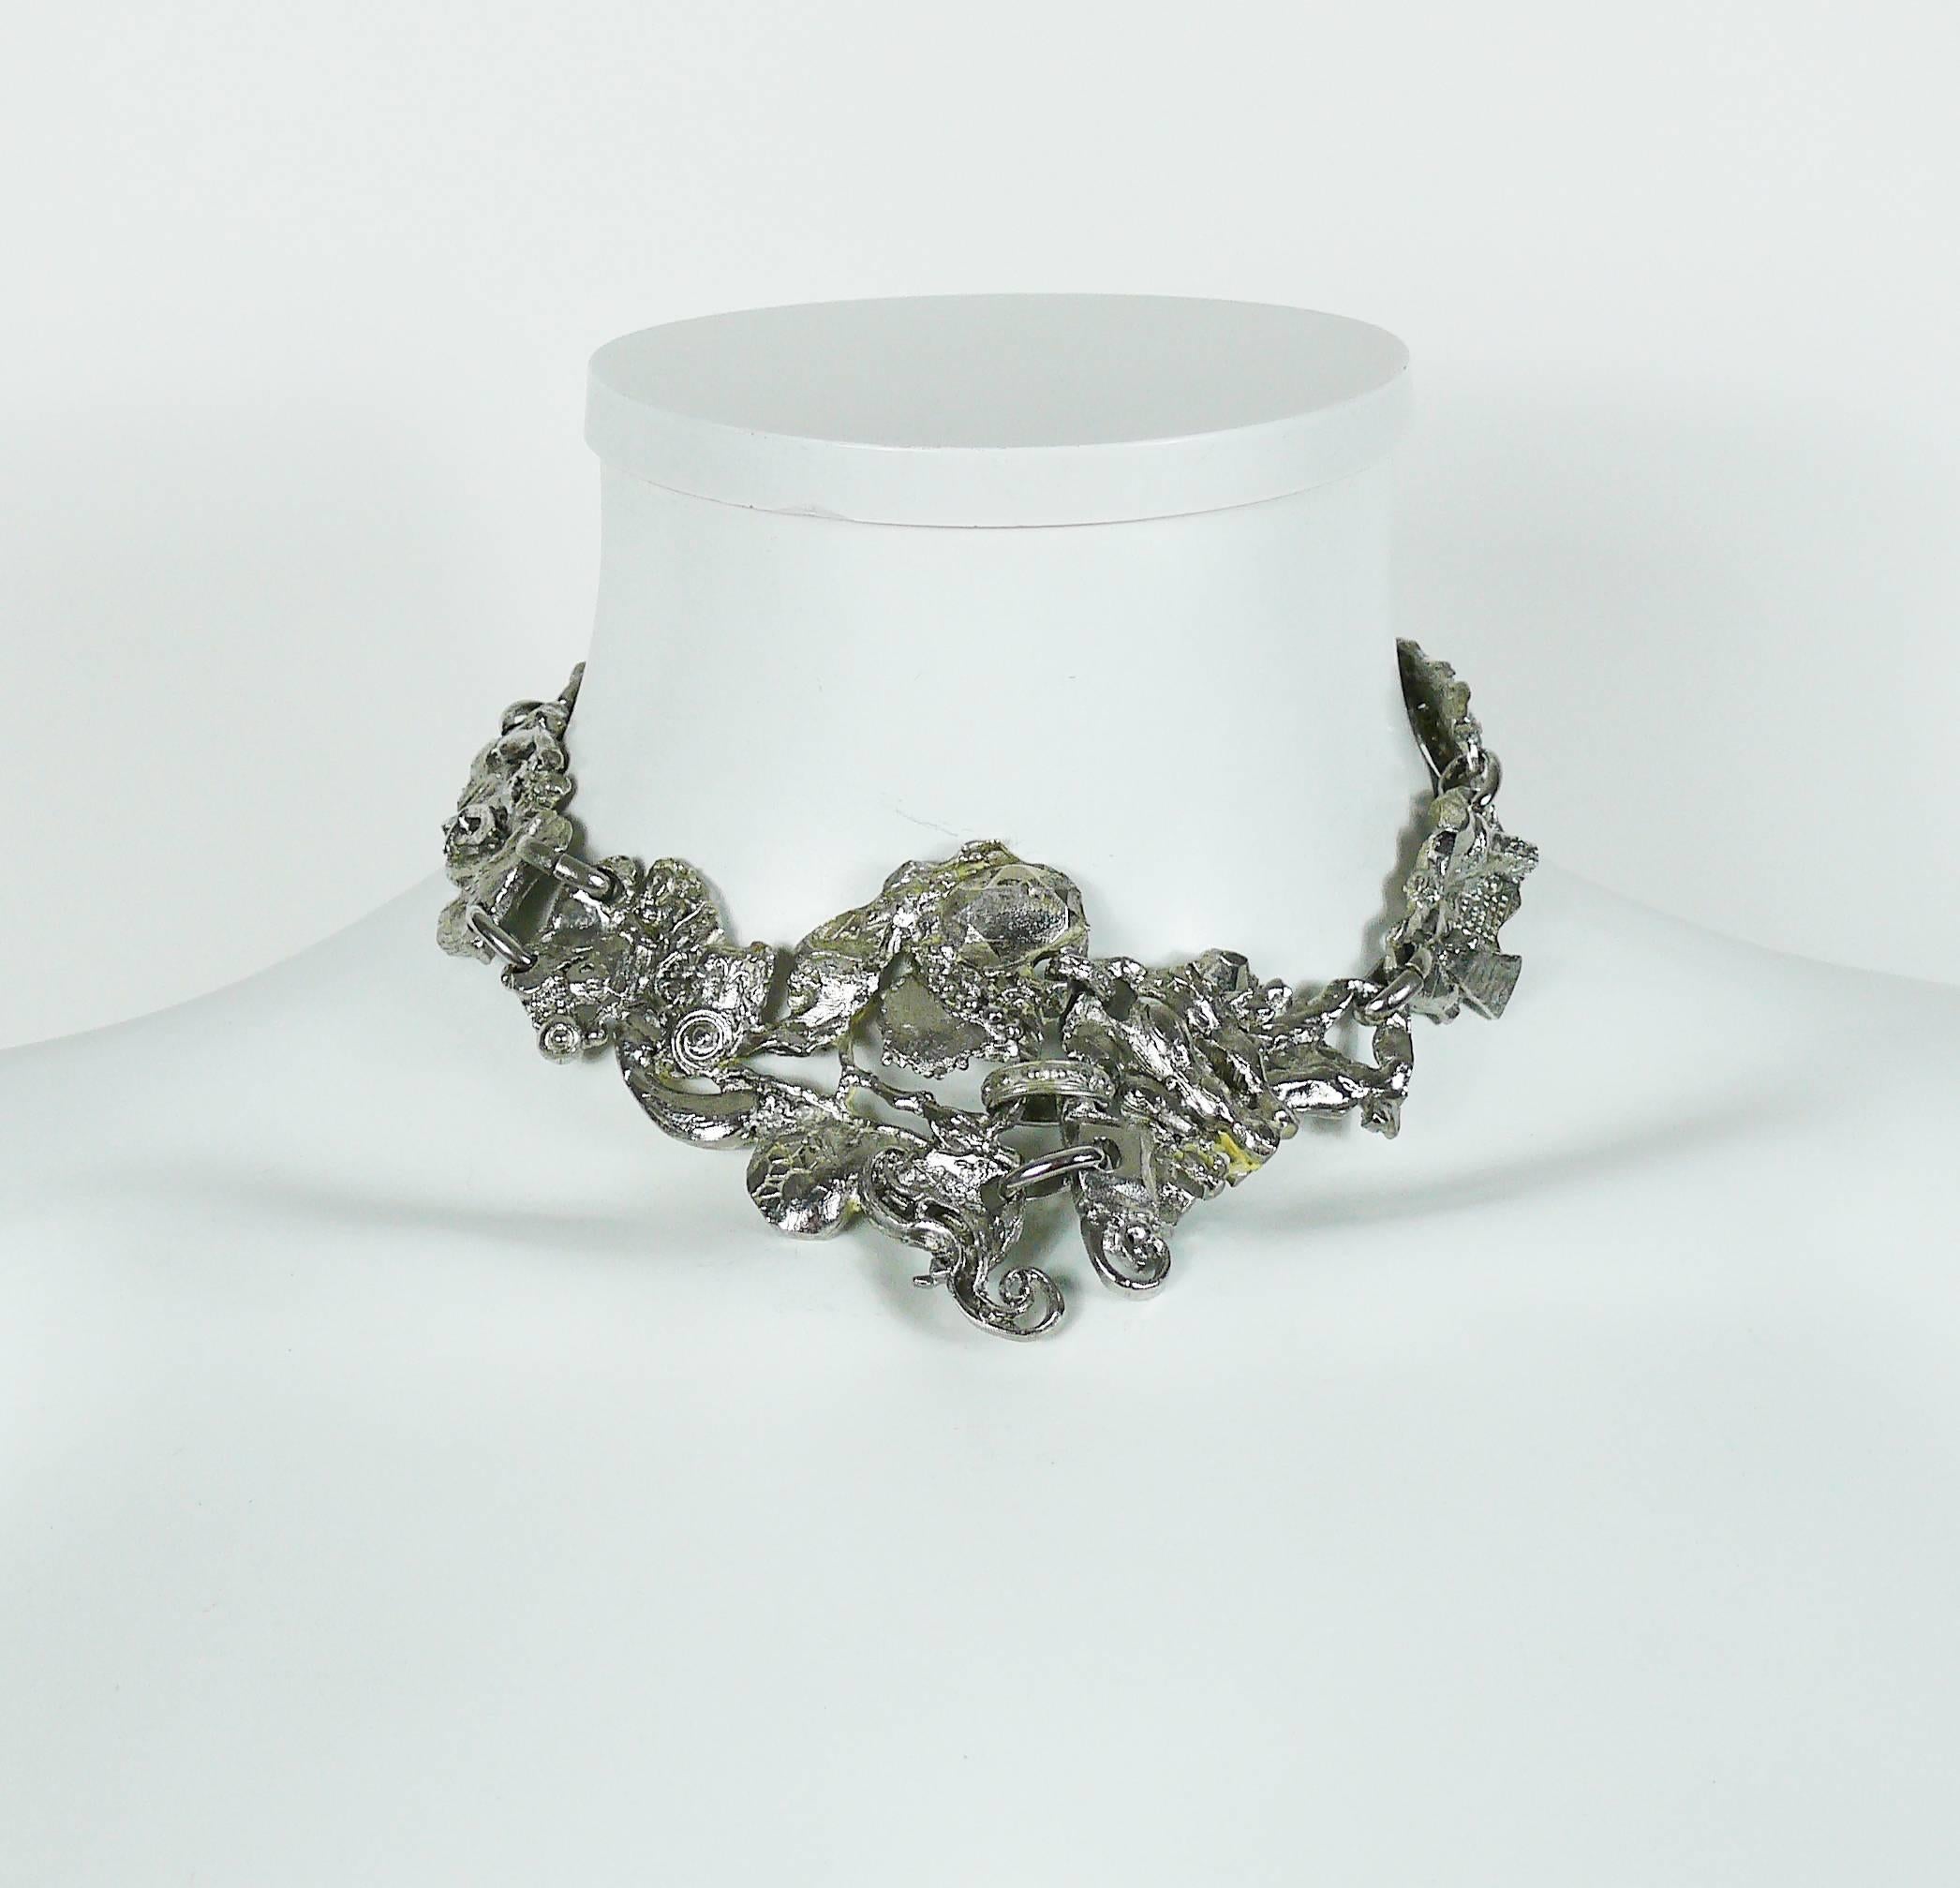 CHRISTIAN LACROIX vintage brutalist silver toned necklace and bracelet set.

Marked CHRISTIAN LACROIX CL Made in France.

NECKLACE indicative measurements : max. length approx. 36.5 cm (14.37 inches) / adjustable length from approx. 34 cm (13.39